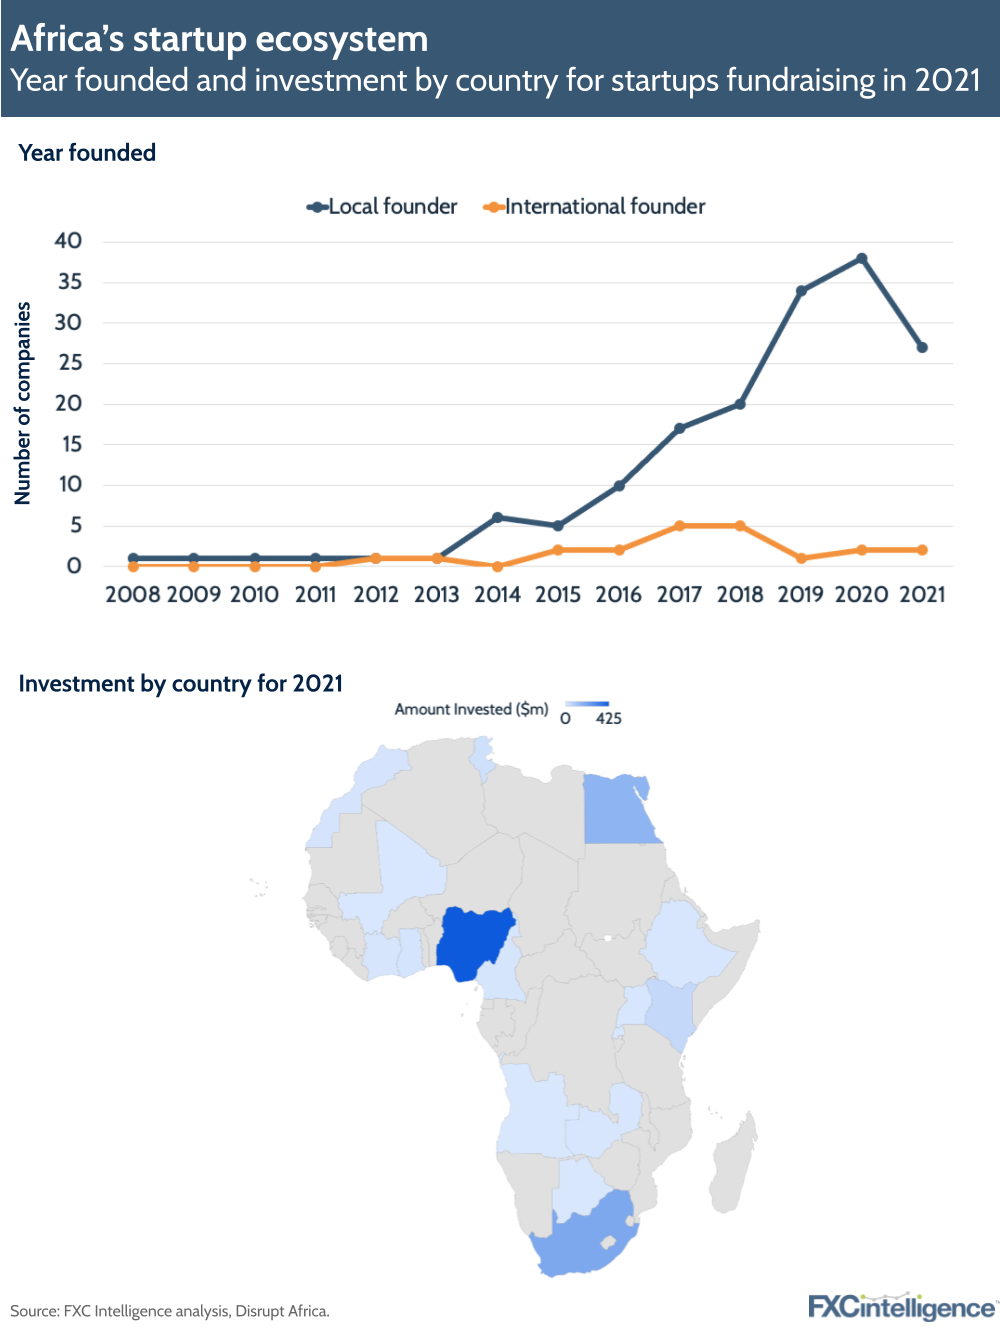 Africa startups by year founded, investment and country